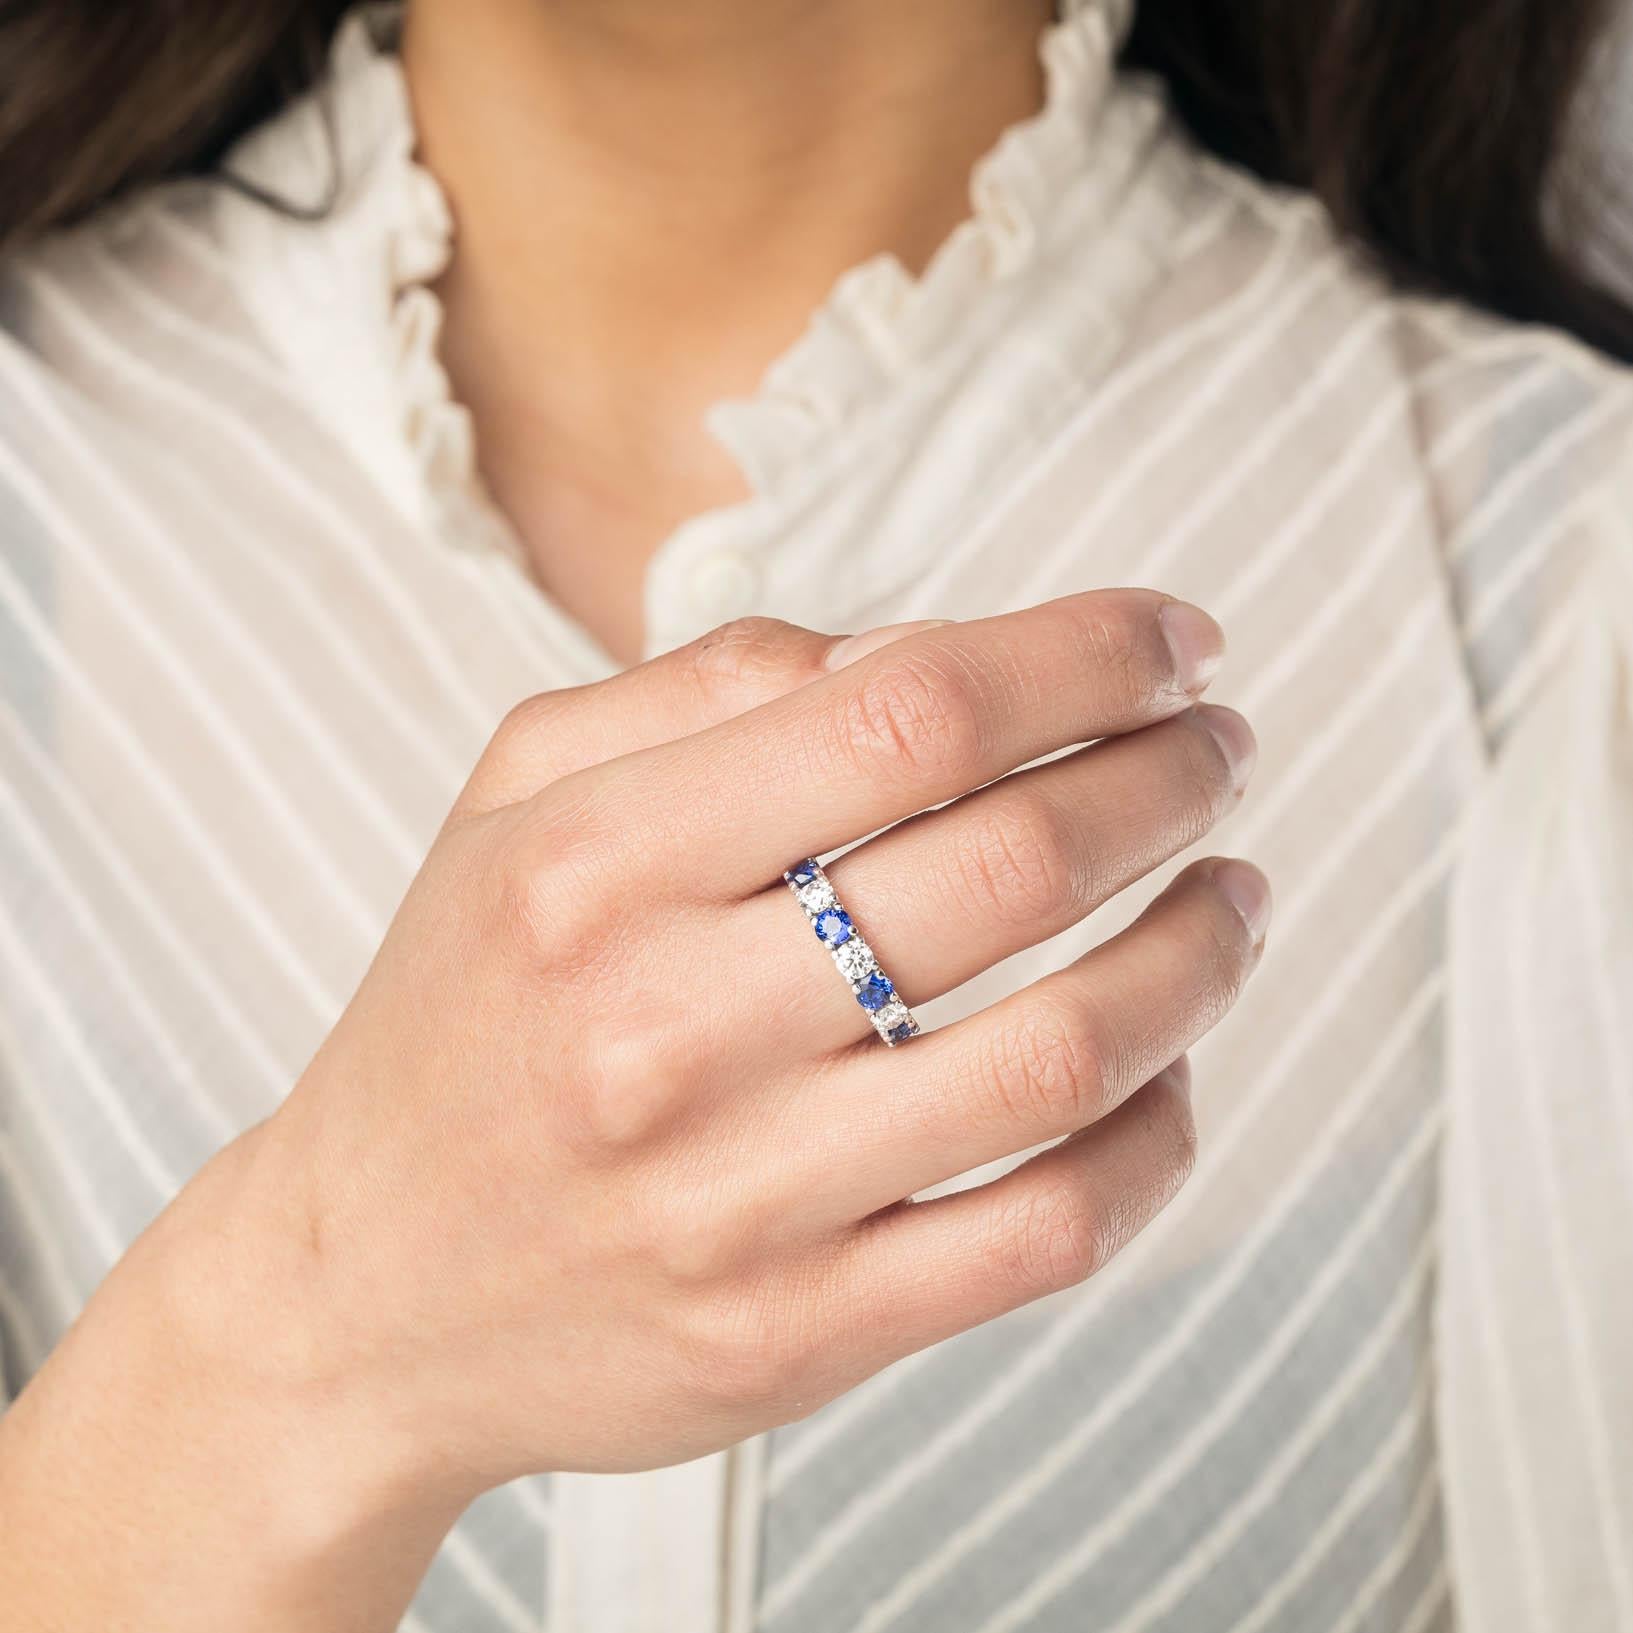 We invite you to see more of our collection from Cober Jewellery at 1stDibs!
You can type Cober Jewellery in the search bar to view more pieces of jewellery at our webshop.

1.5 Carat in total Royal Blue Sapphire and Diamonds White Gold ring Cober